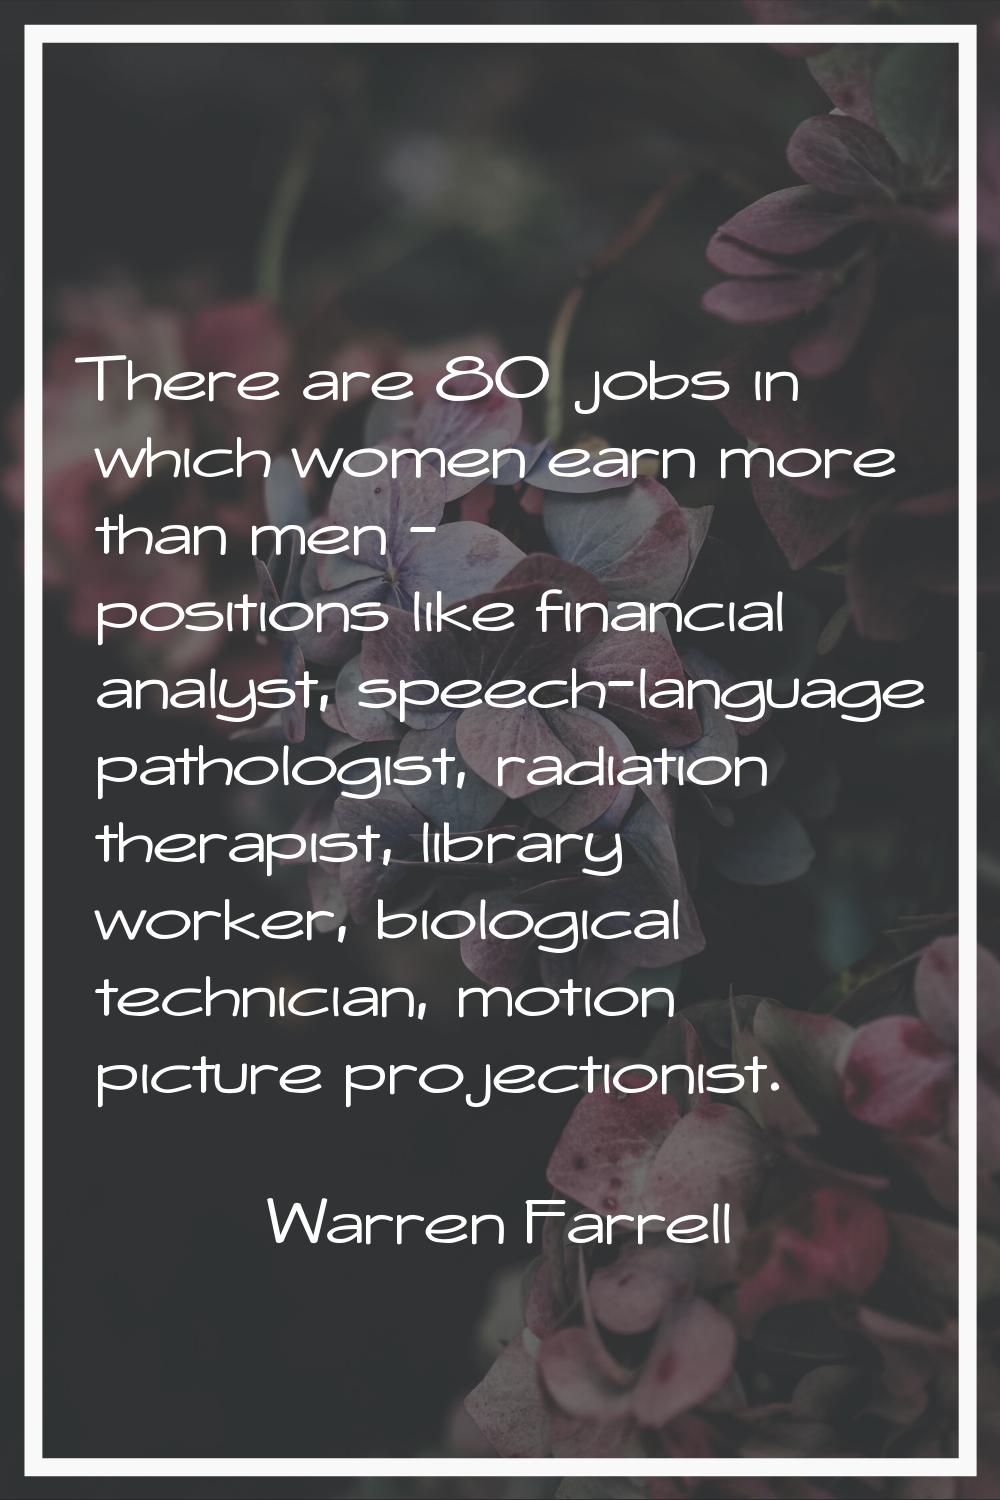 There are 80 jobs in which women earn more than men - positions like financial analyst, speech-lang